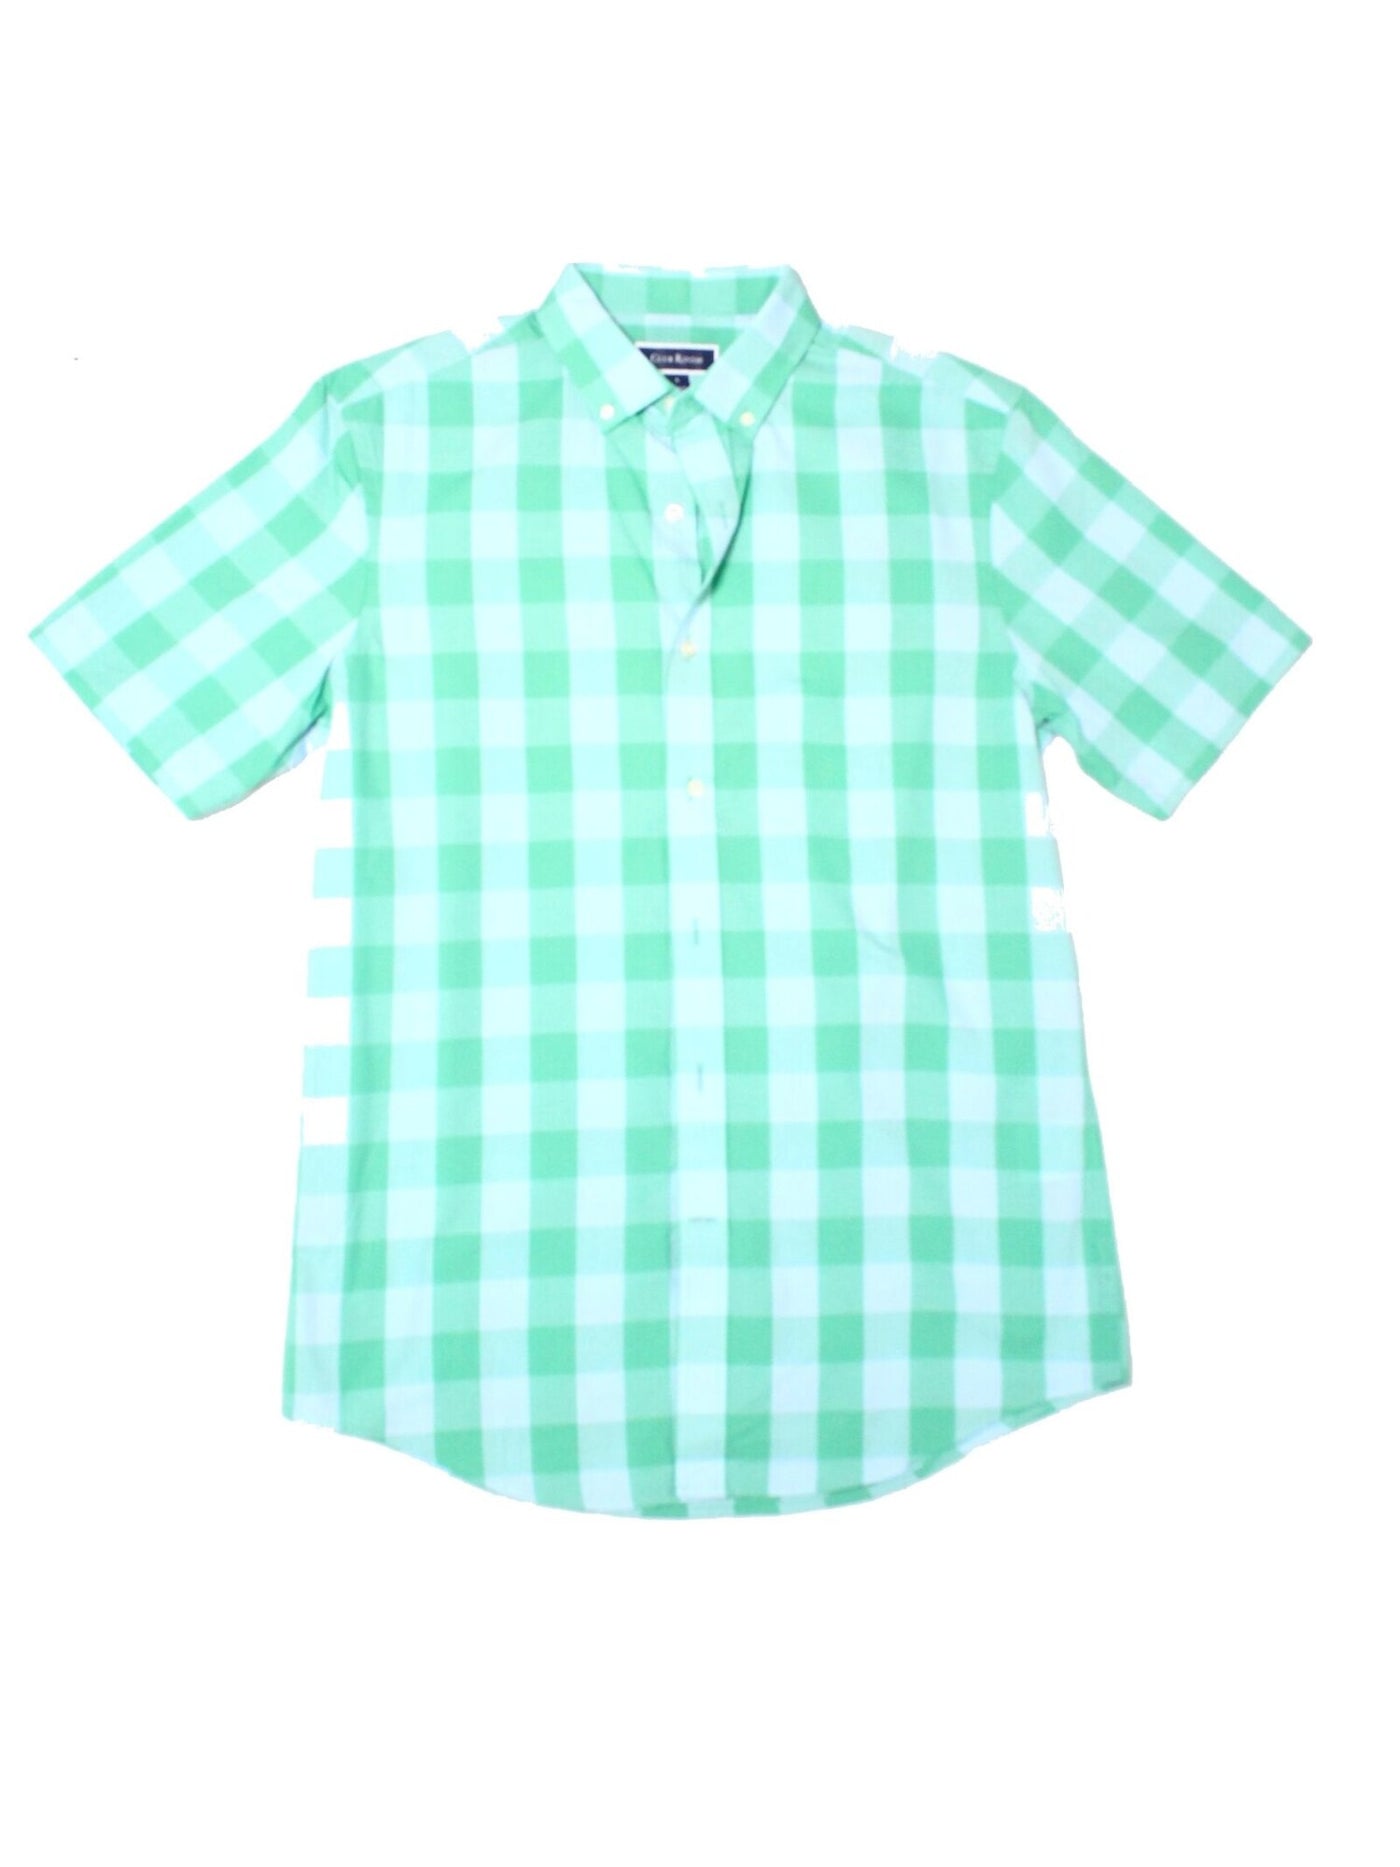 CLUBROOM Mens Green Plaid Short Sleeve Classic Fit Button Down Casual Shirt S